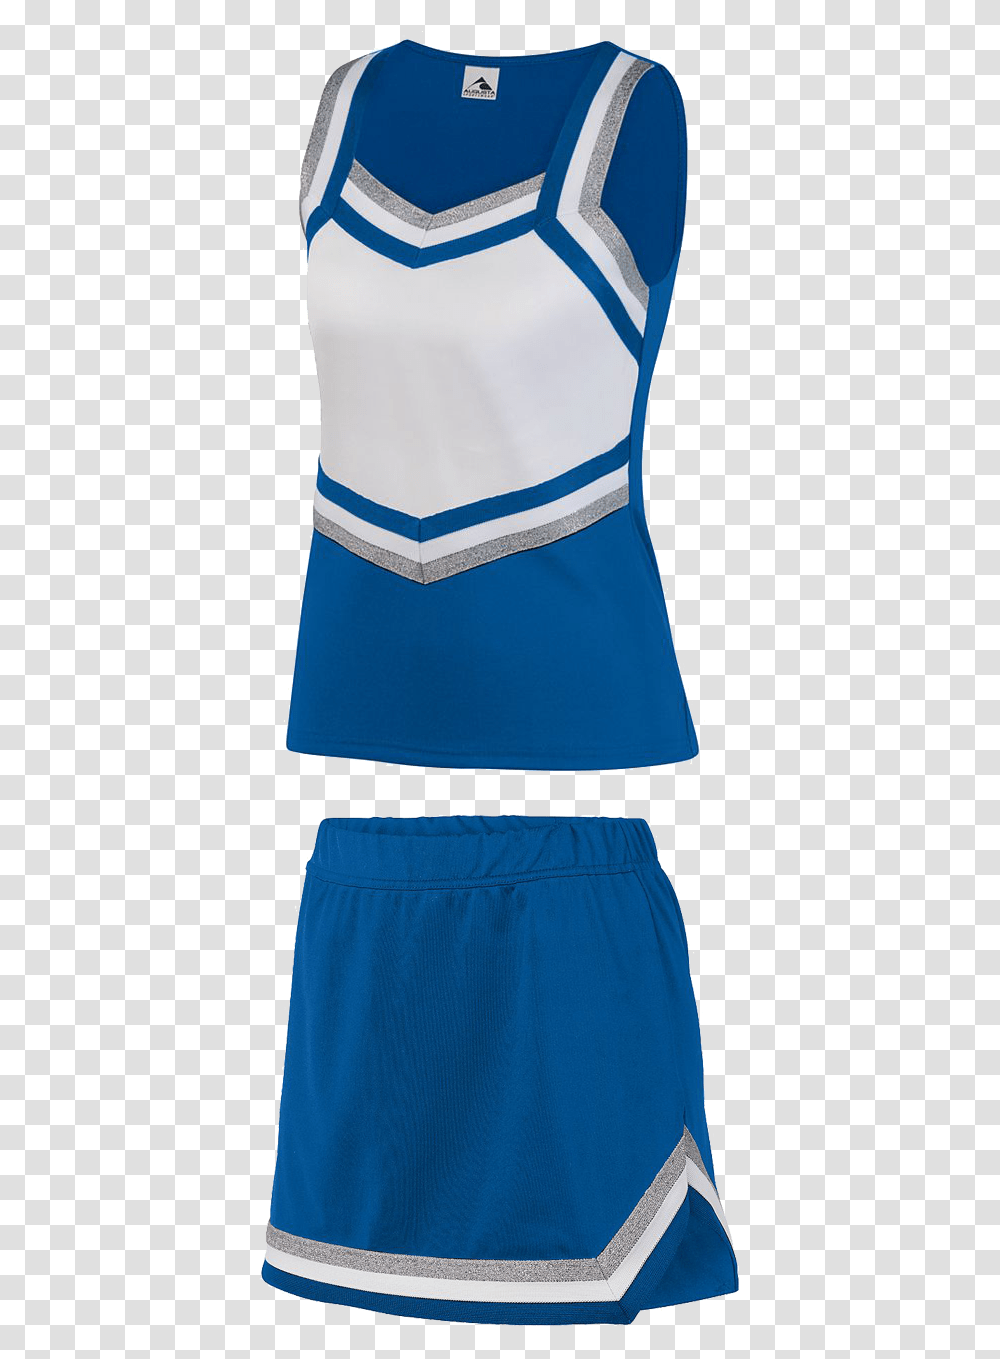 Red And White Cheer Uniform, Shorts, Apparel, Skirt Transparent Png